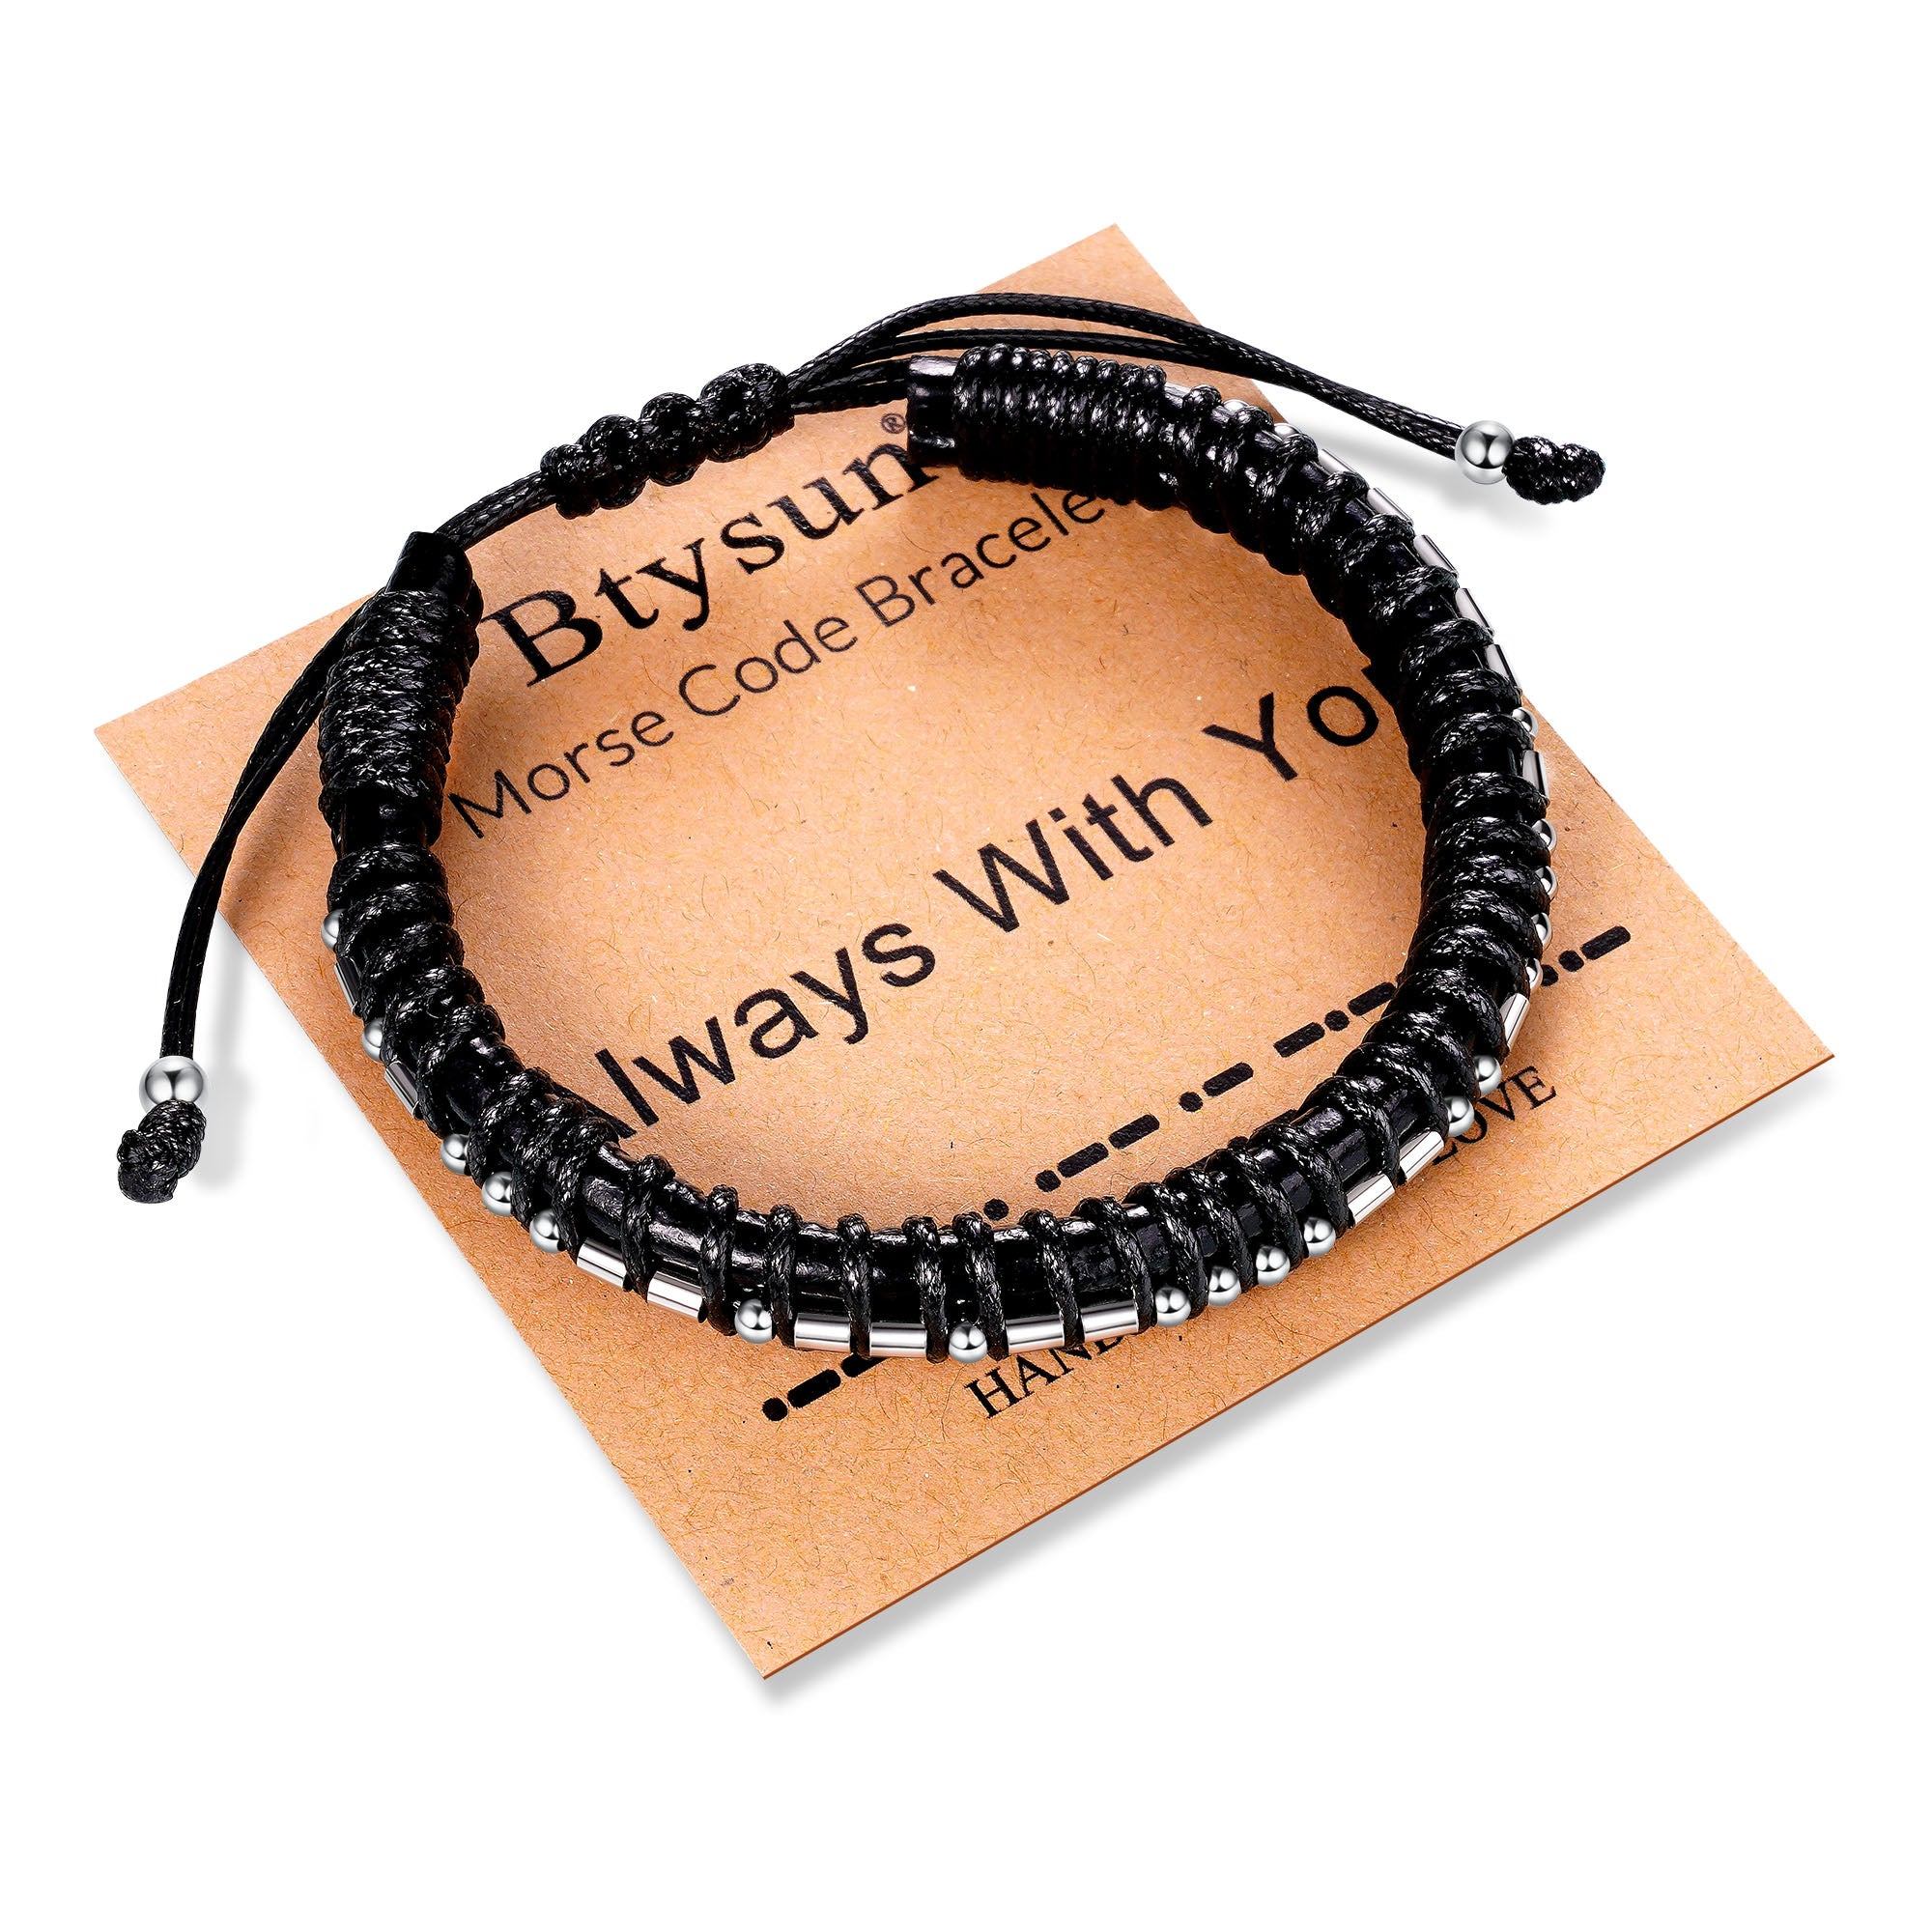 Wmkox8yii Bracelets For Women,Inspirational Code Bracelets Message Funny  Jewelry With Wood Beads For Birthday Gifts 